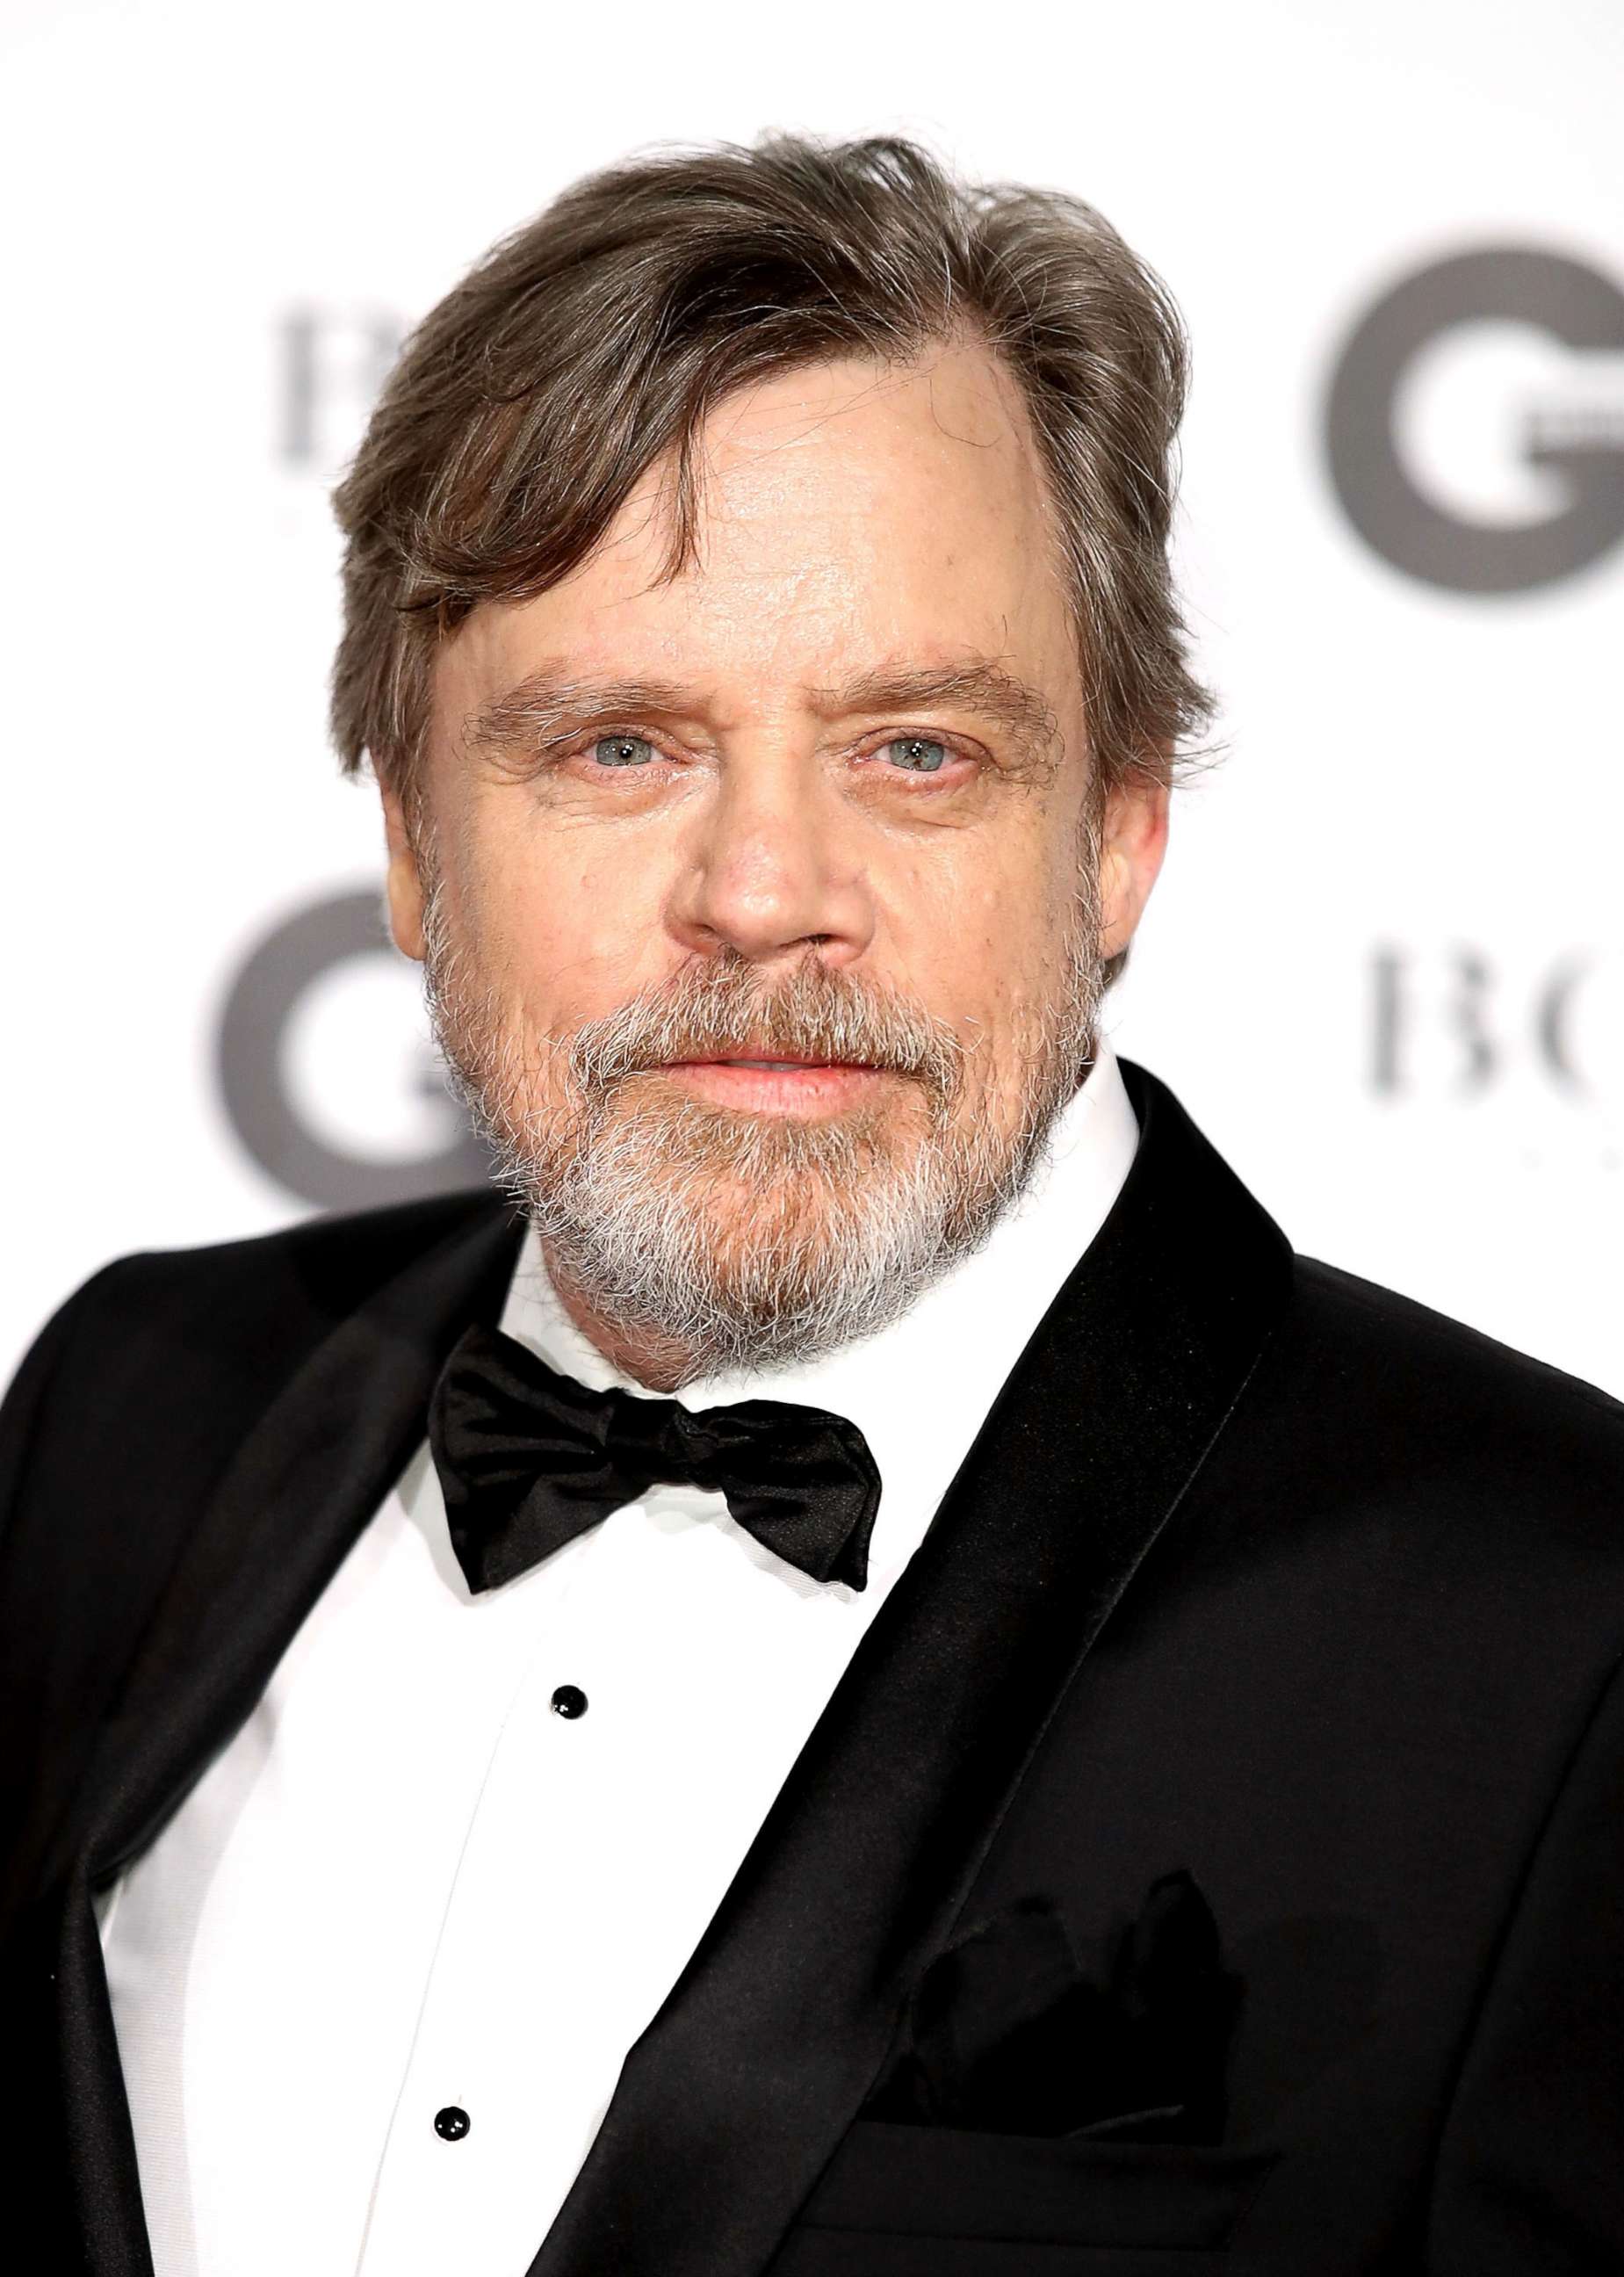 PHOTO: Mark Hamill attends the GQ Men Of The Year Awards at Tate Modern, Sept. 5, 2017, in London.